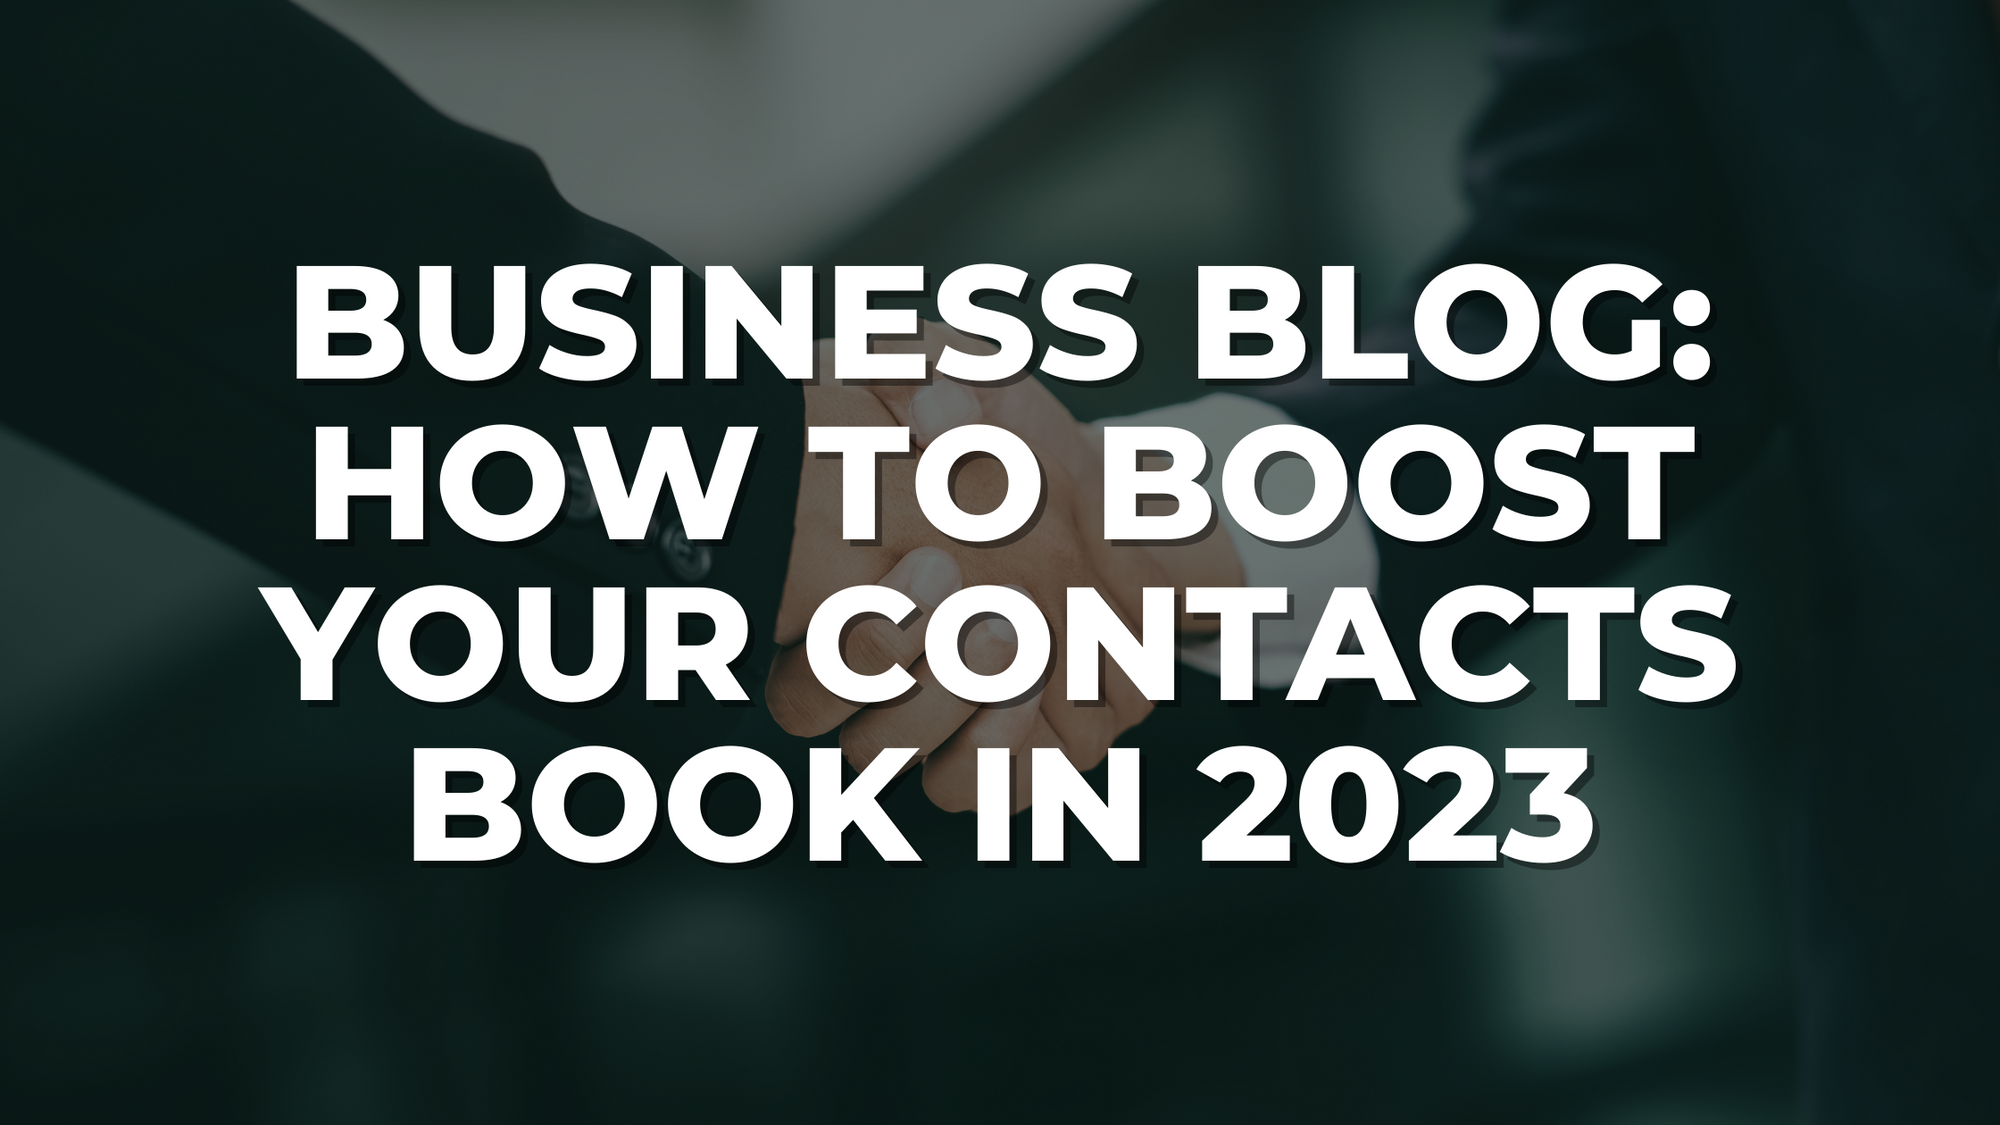 5 Tips To Boost Your Contacts Book In 2023